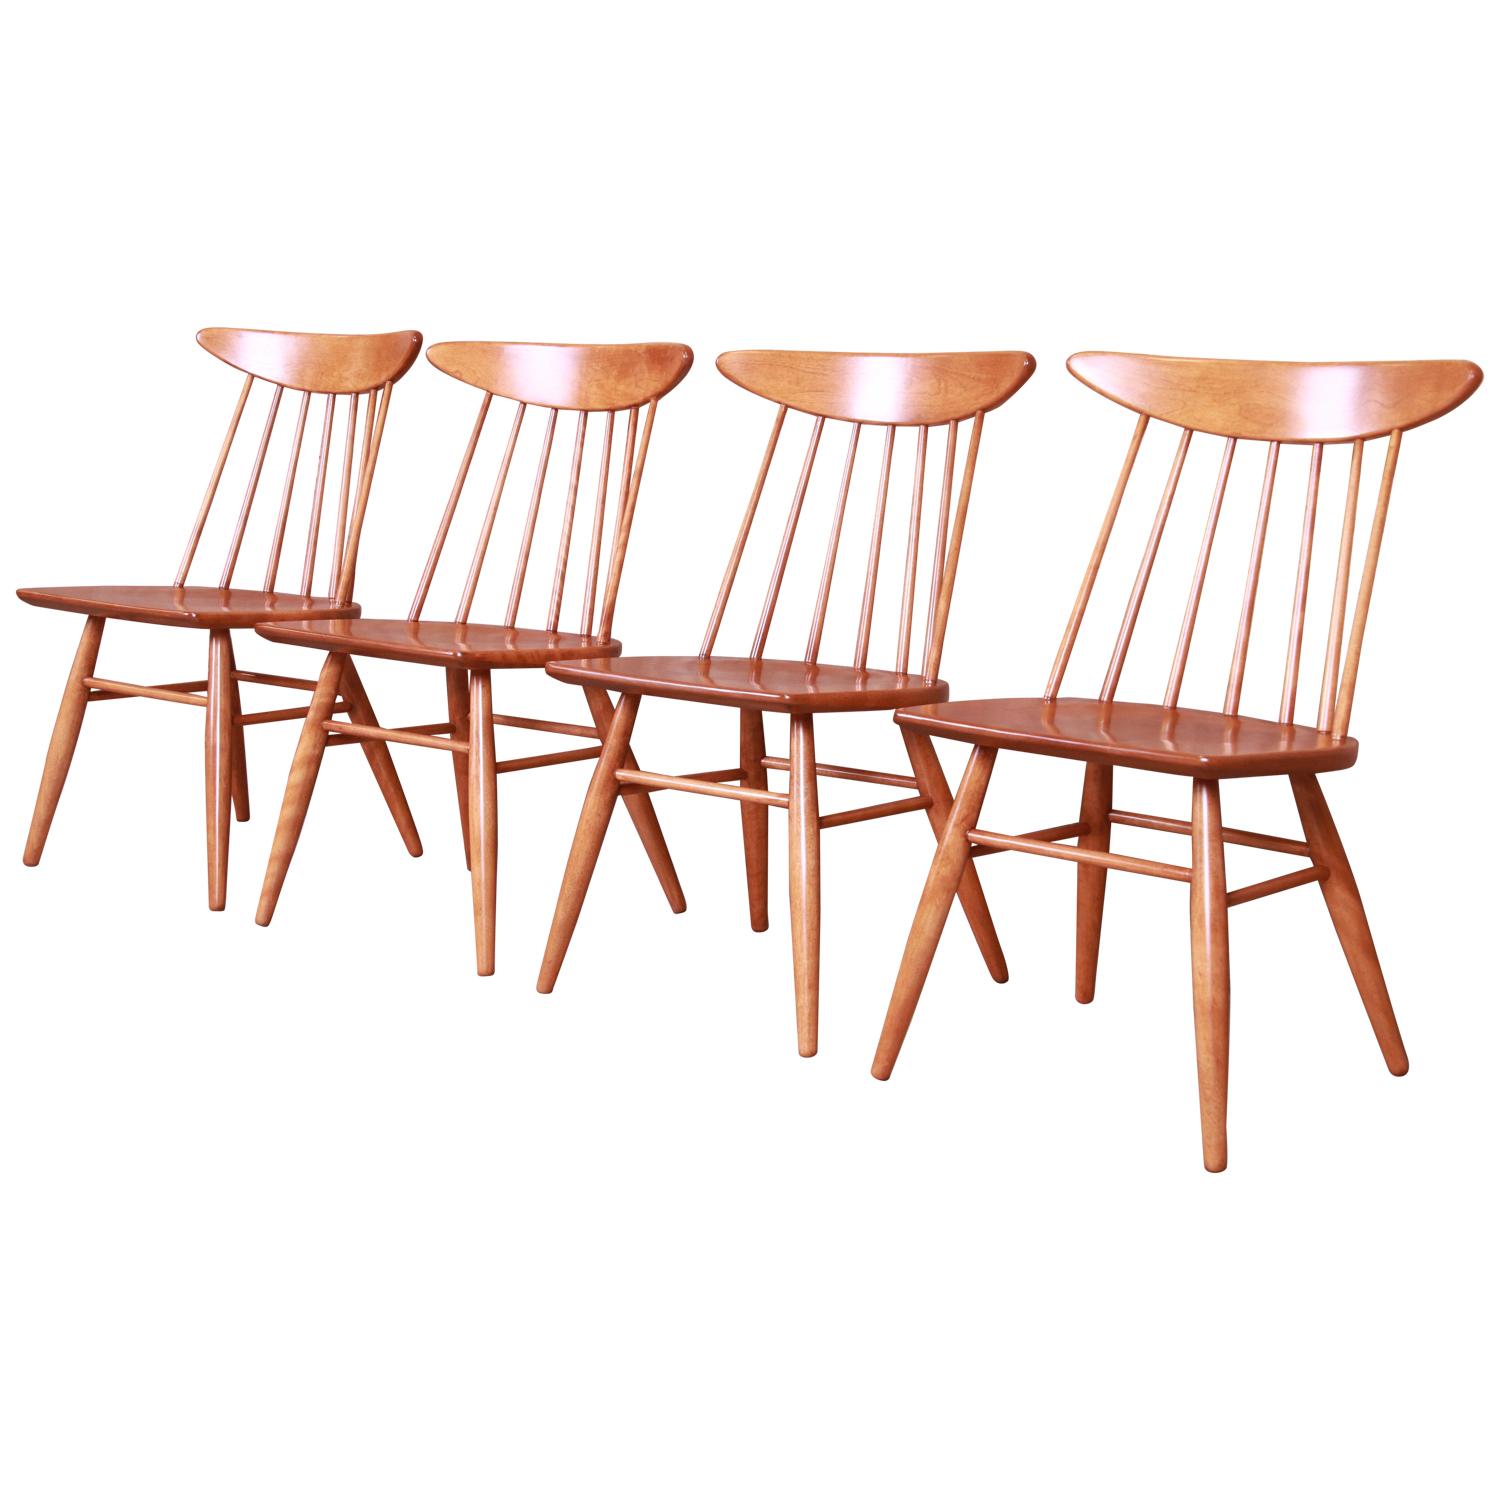 Russel Wright for Conant Ball Solid Birch Dining Chairs, Newly Refinished